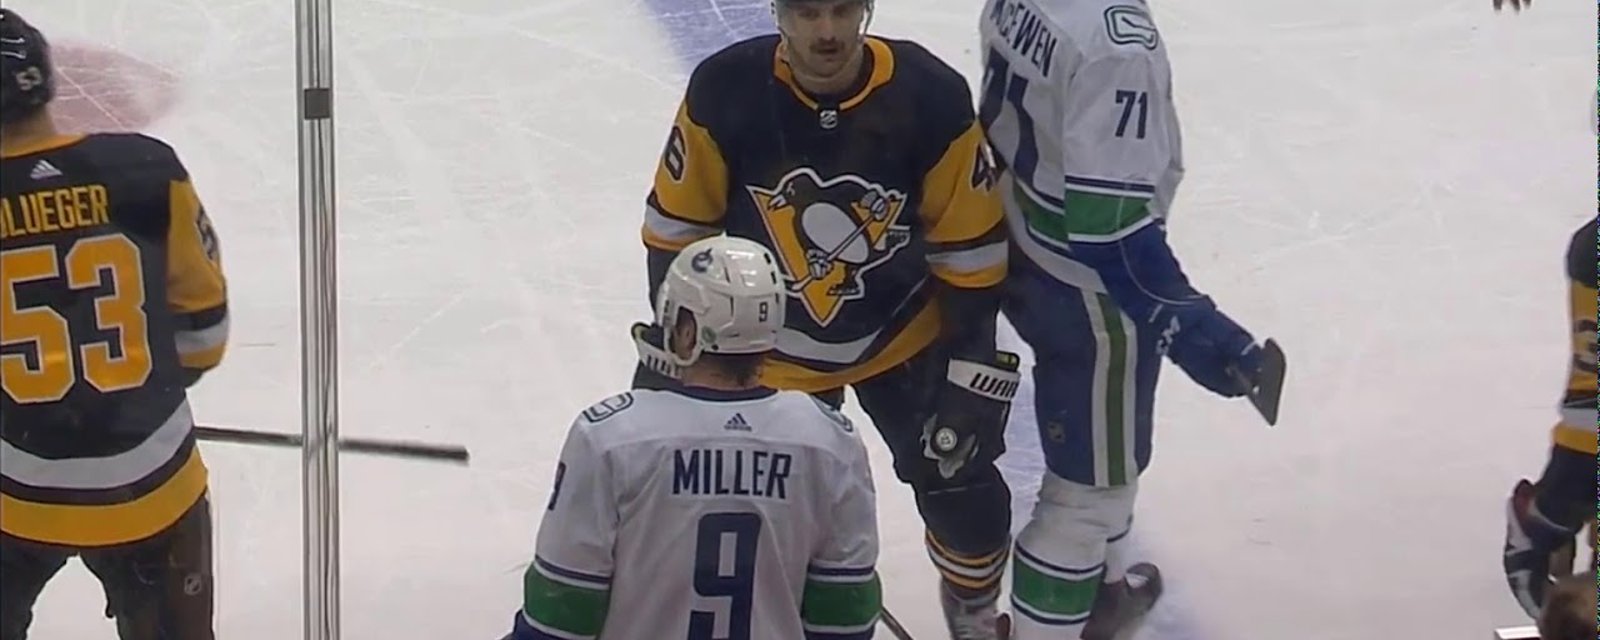 First rounder Miller admits on ice he doesn’t know what the rules are 